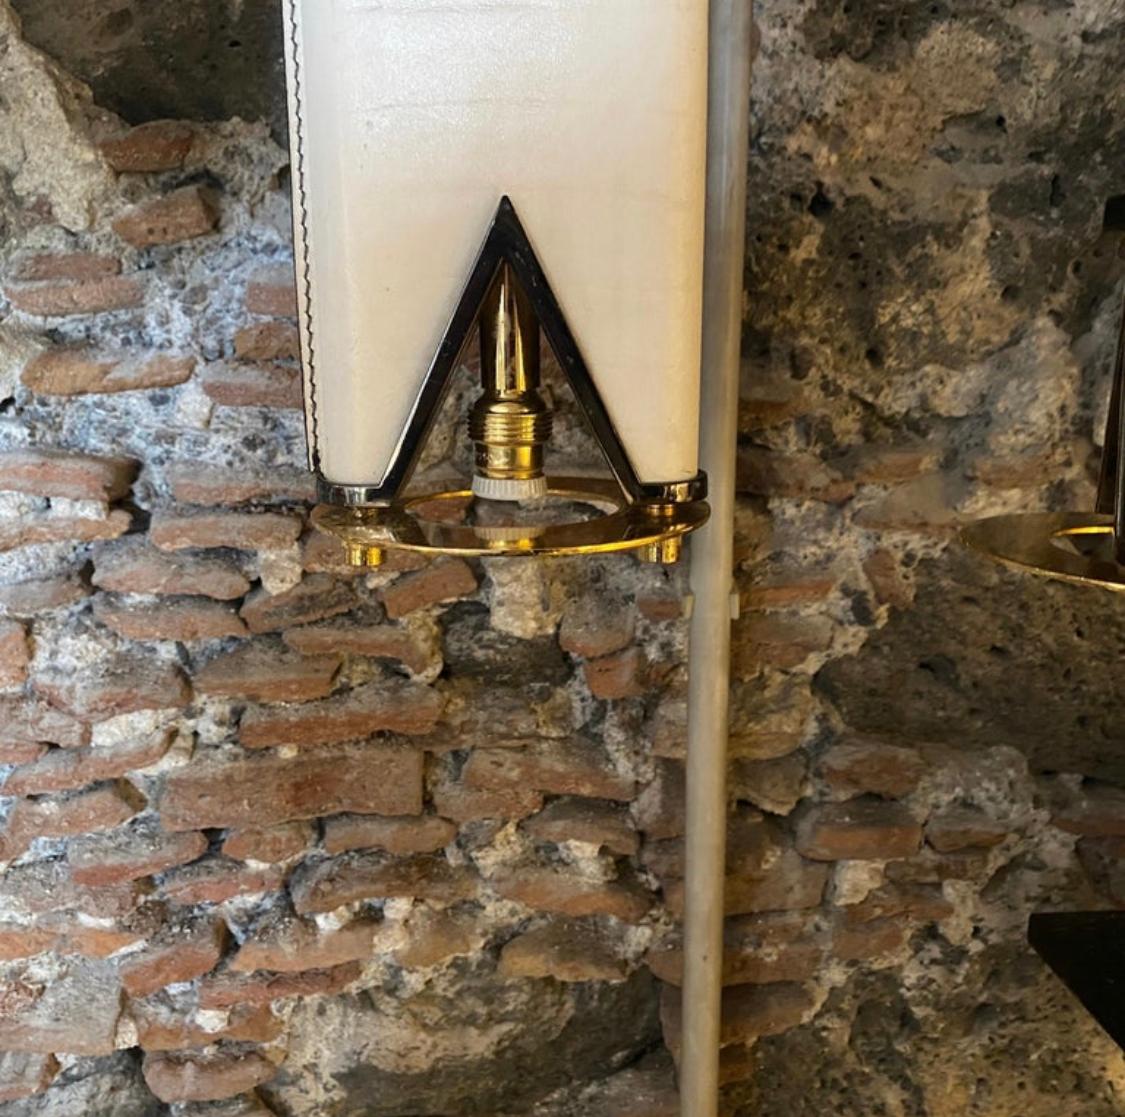 A double light pendant designed and manufactured in Italy in the Eighties. The white and black skin it's in very good condition, the brass it's in original patina.
This double pendant is a stunning lighting fixture that seamlessly combines the